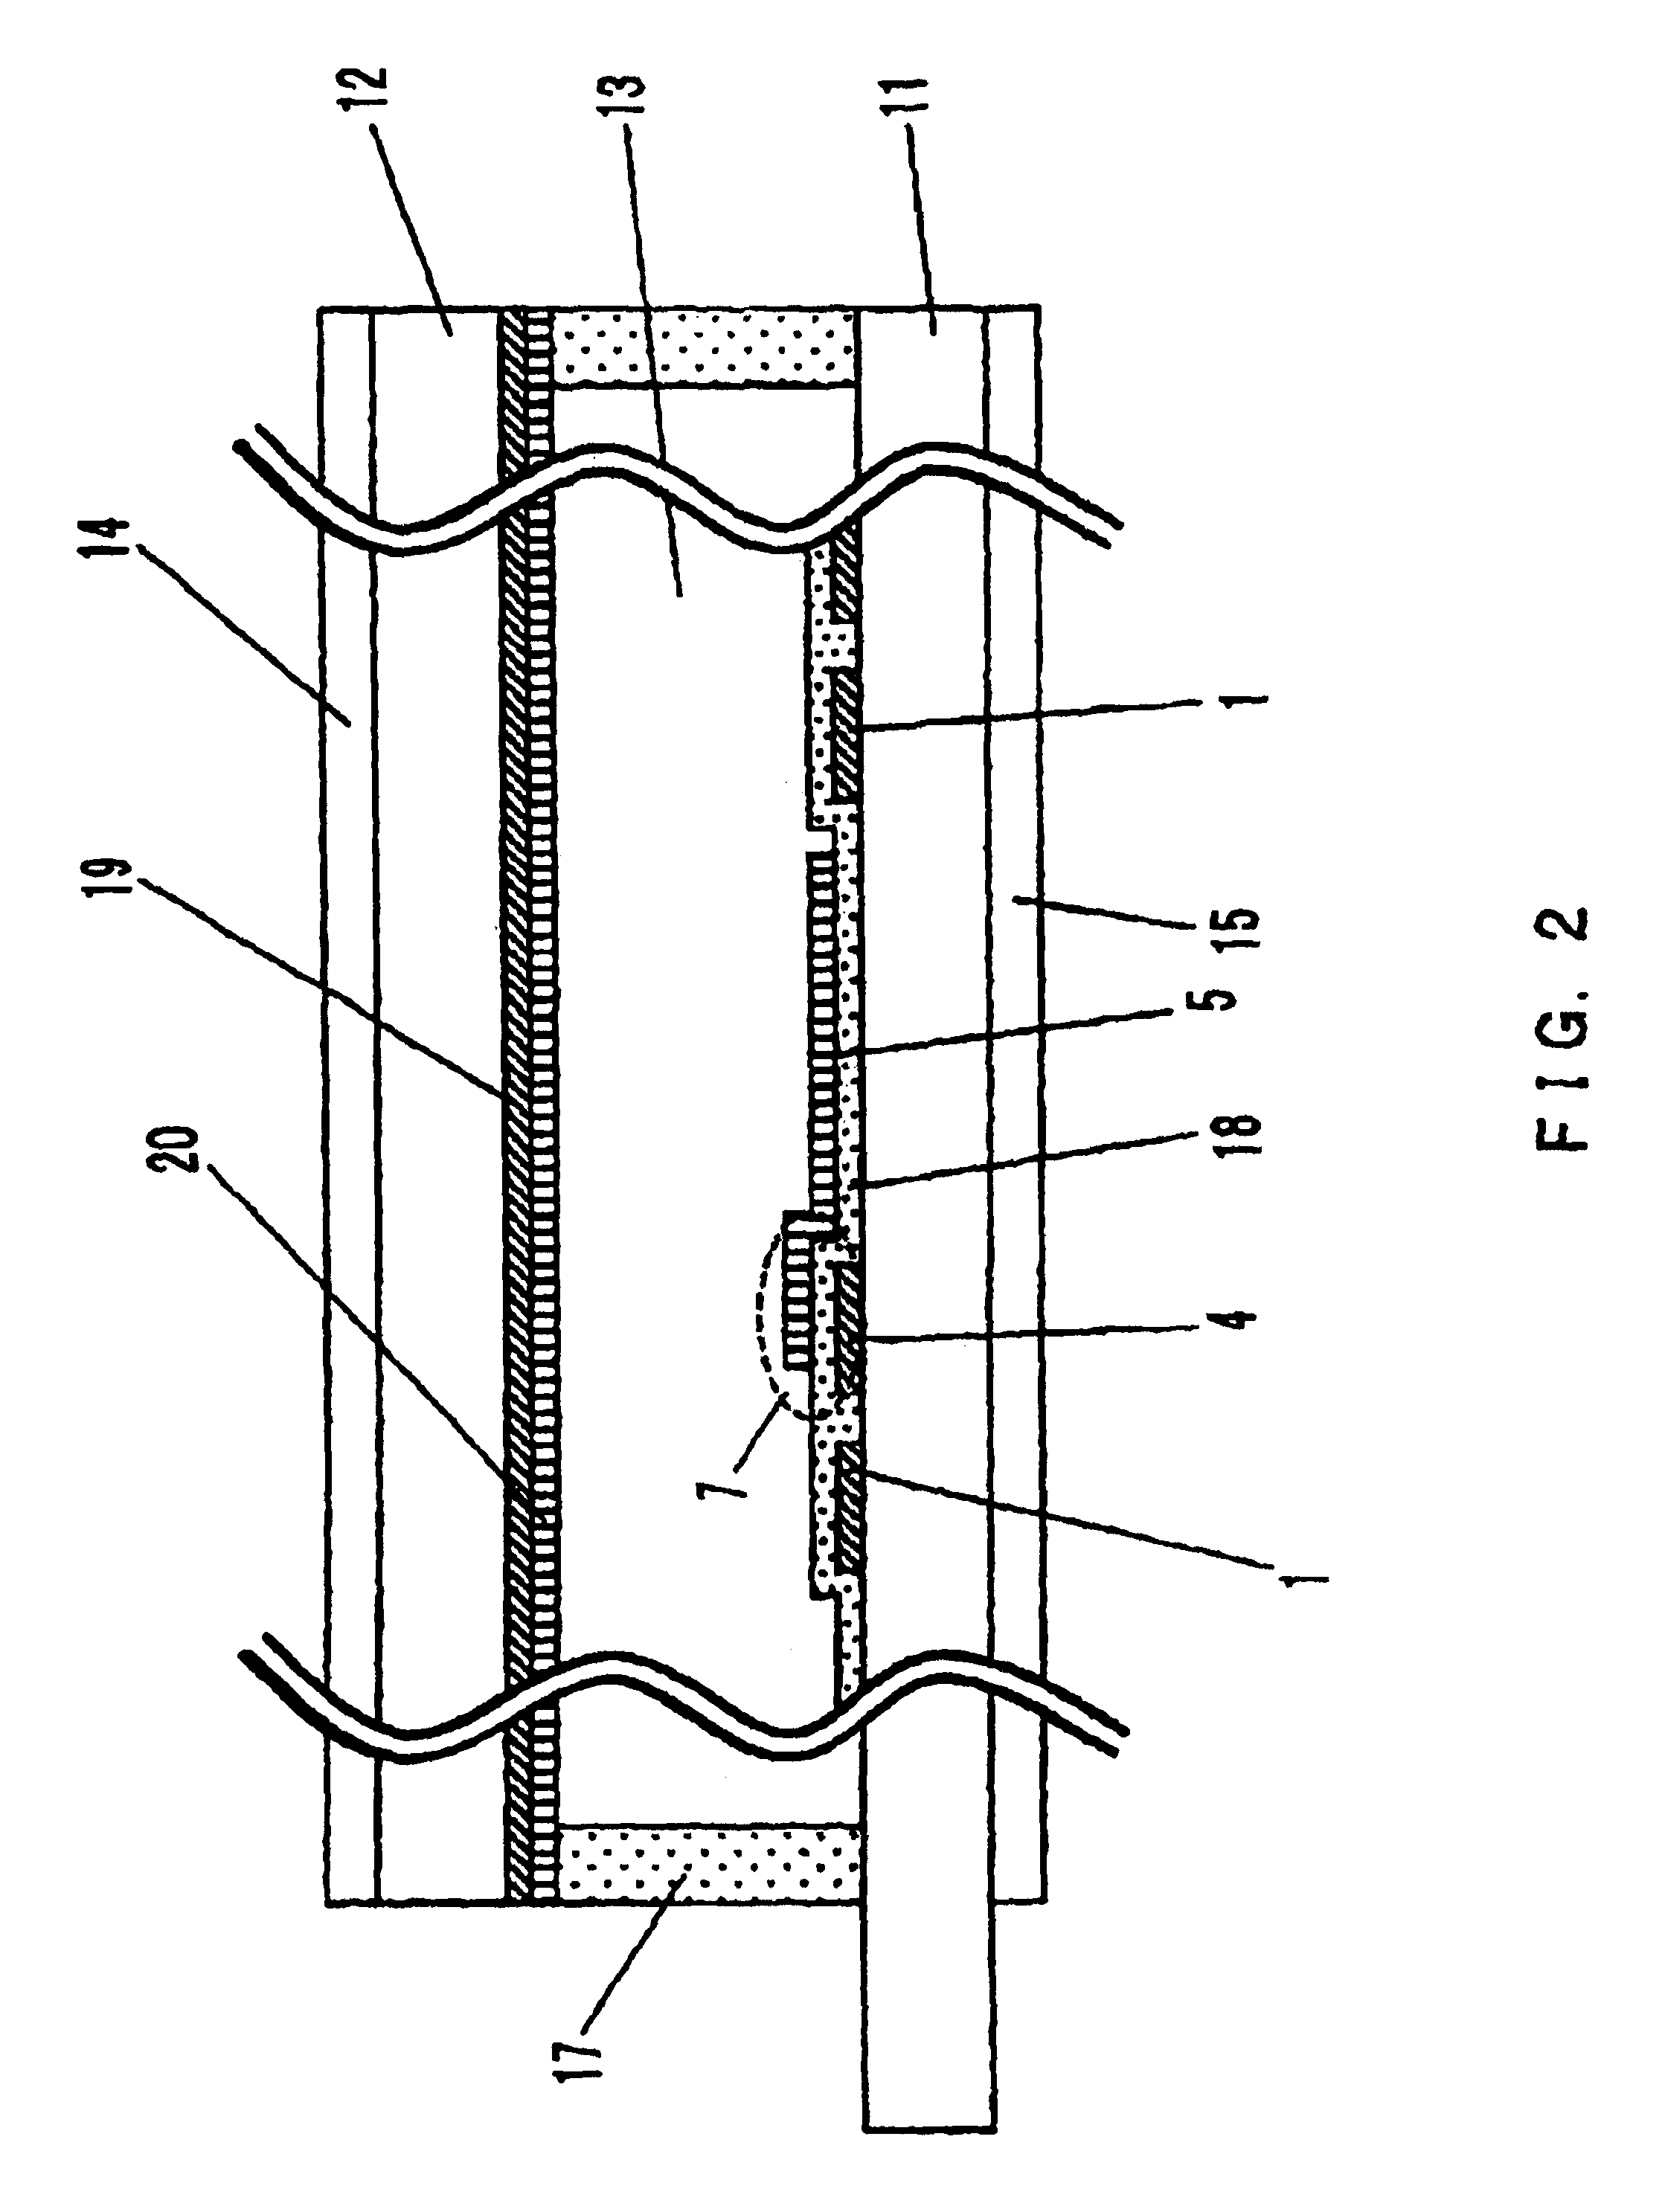 Active matrix type display apparatus, method for driving the same, and display element